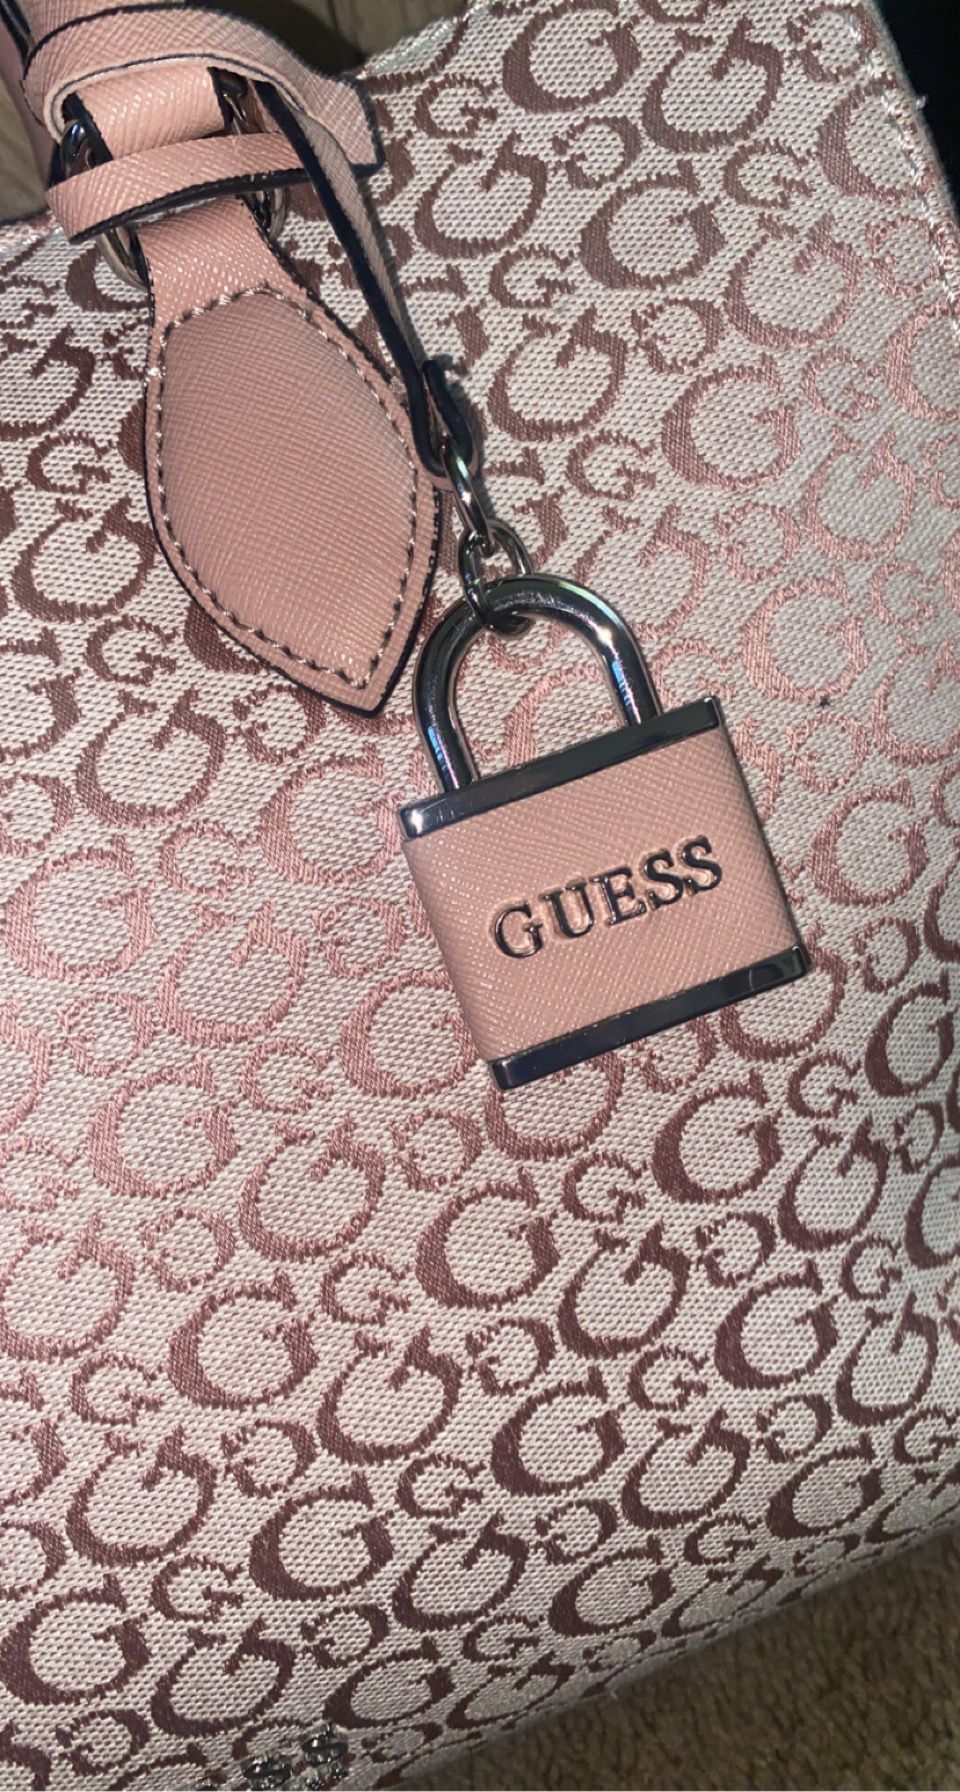 Guess Tote Bag for Sale in Clovis, CA - OfferUp